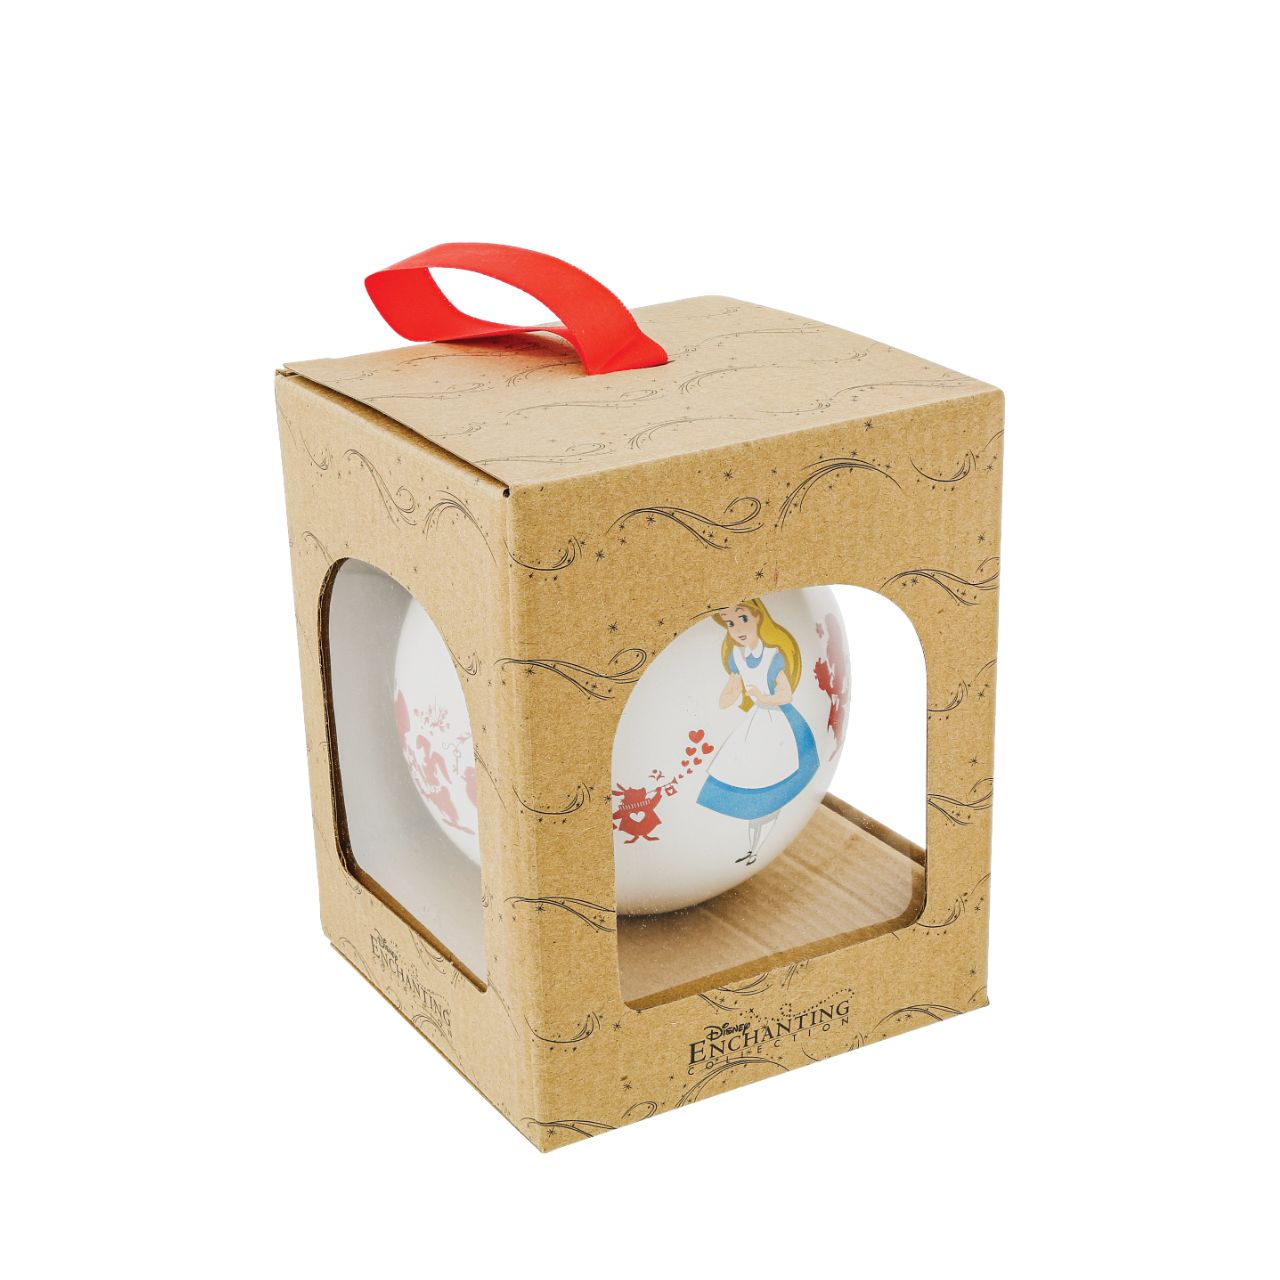 Disney Christmas Bauble Alice in Wonderland We're All Mad Here  Enchanting Disney Collection  A beautiful glass Alice Bauble that makes for a treasured keepsake all year round. This bauble features the popular characters from the curious Disney film Alice in Wonderland.